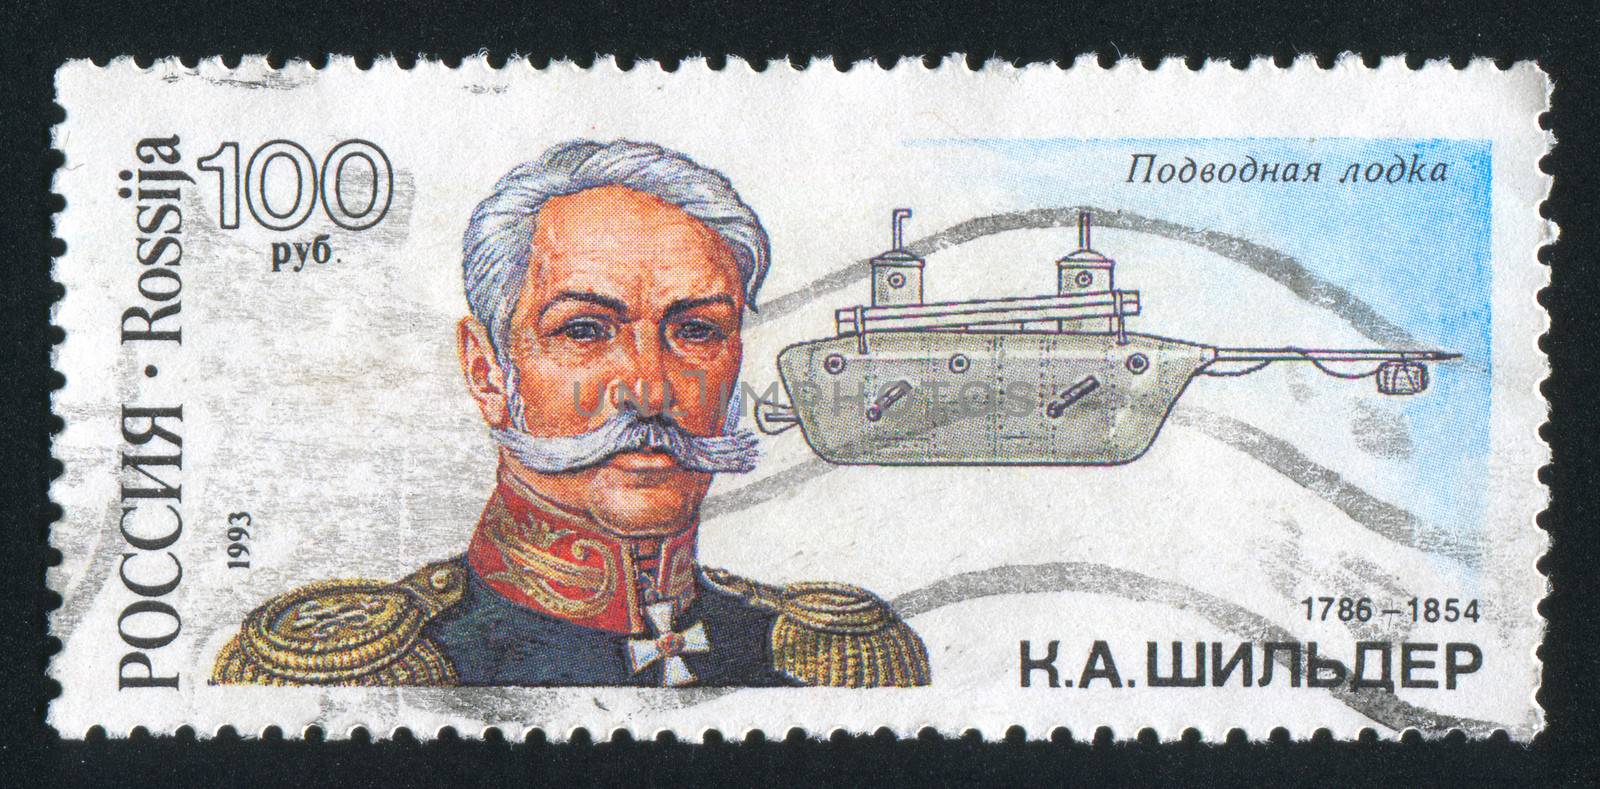 RUSSIA - CIRCA 1993: stamp printed by Russia, shows K.A. Shilder, first all-metal submarine, circa 1993